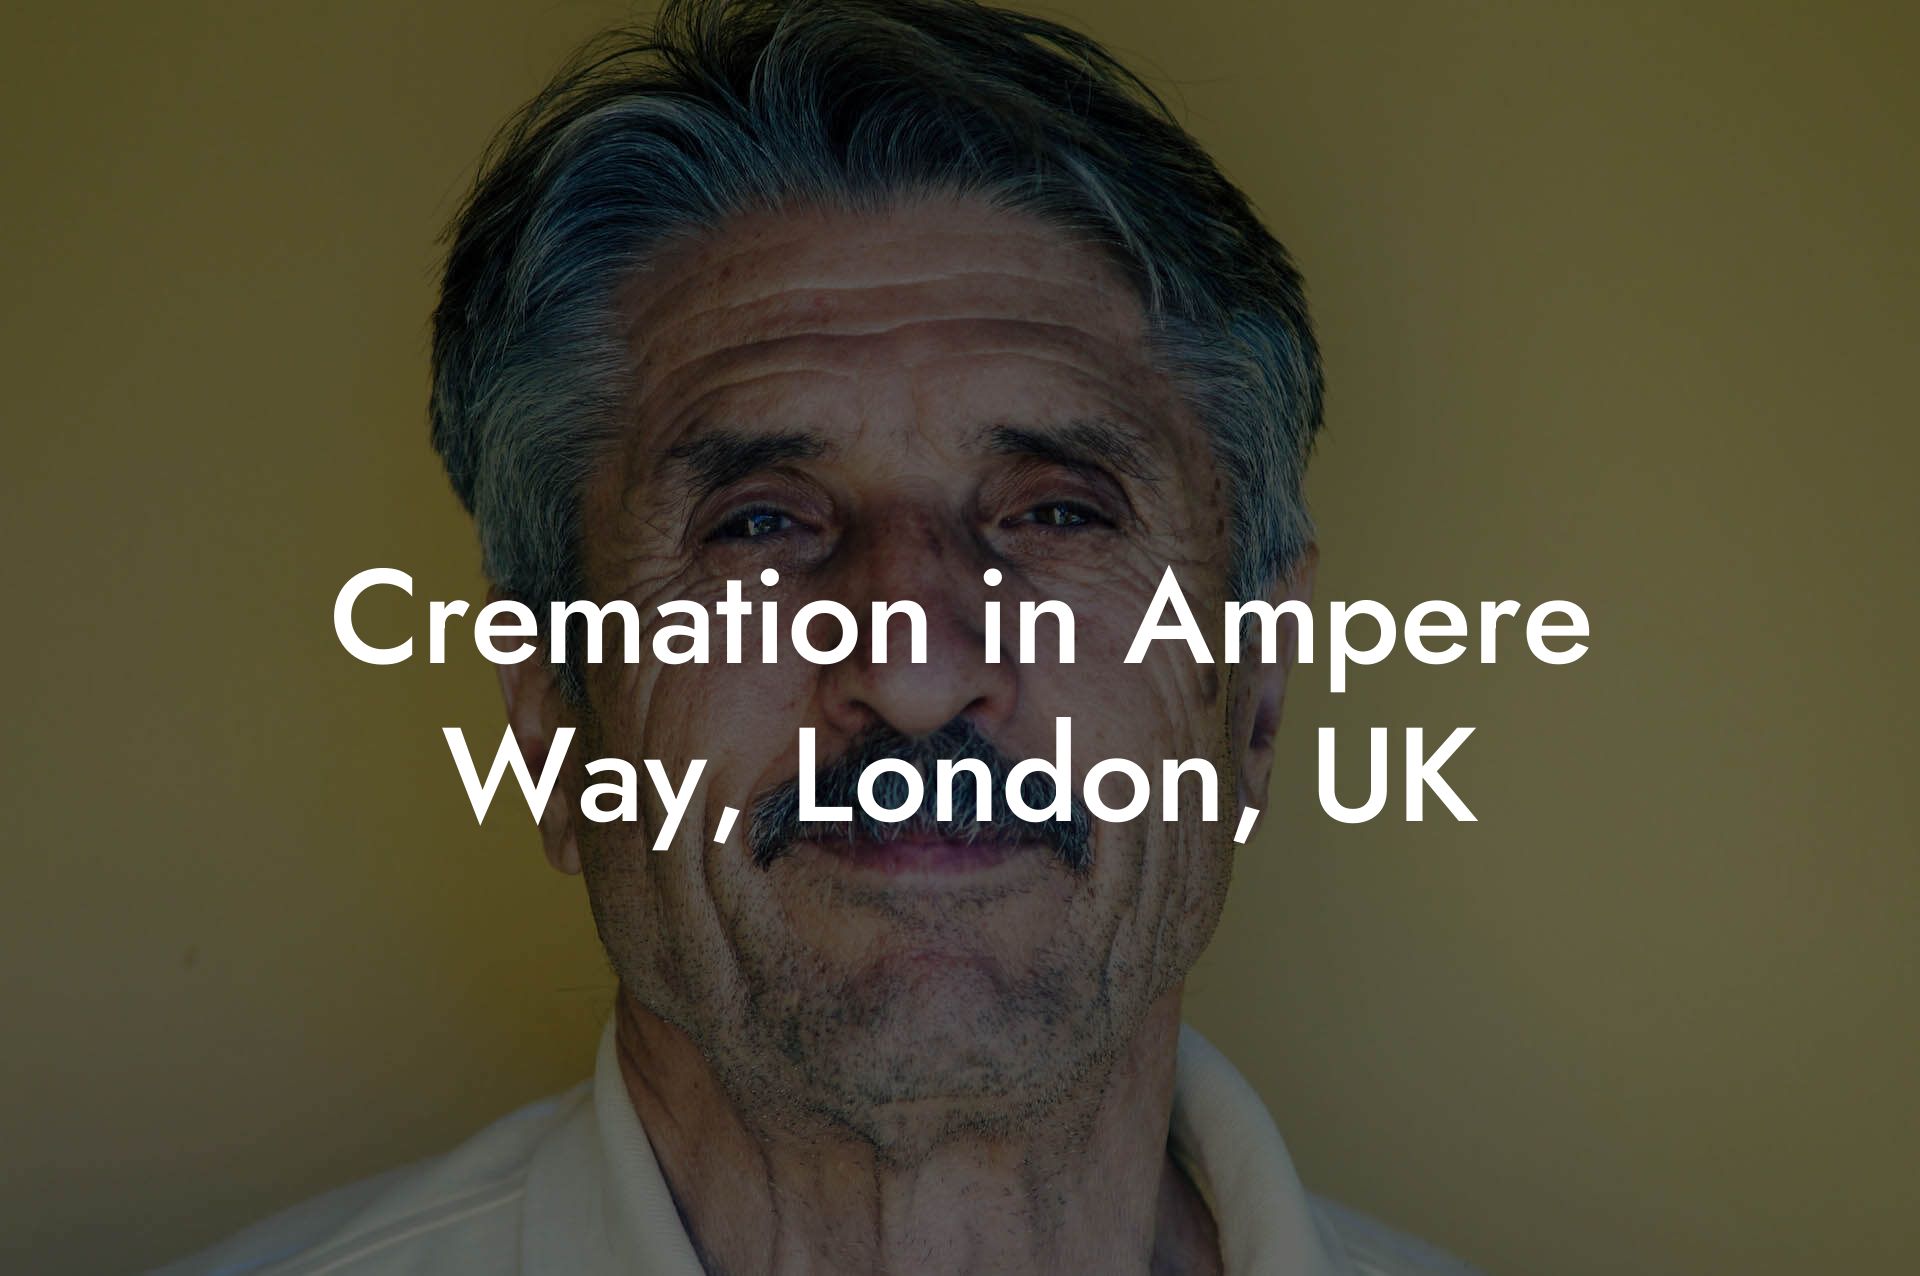 Cremation in Ampere Way, London, UK